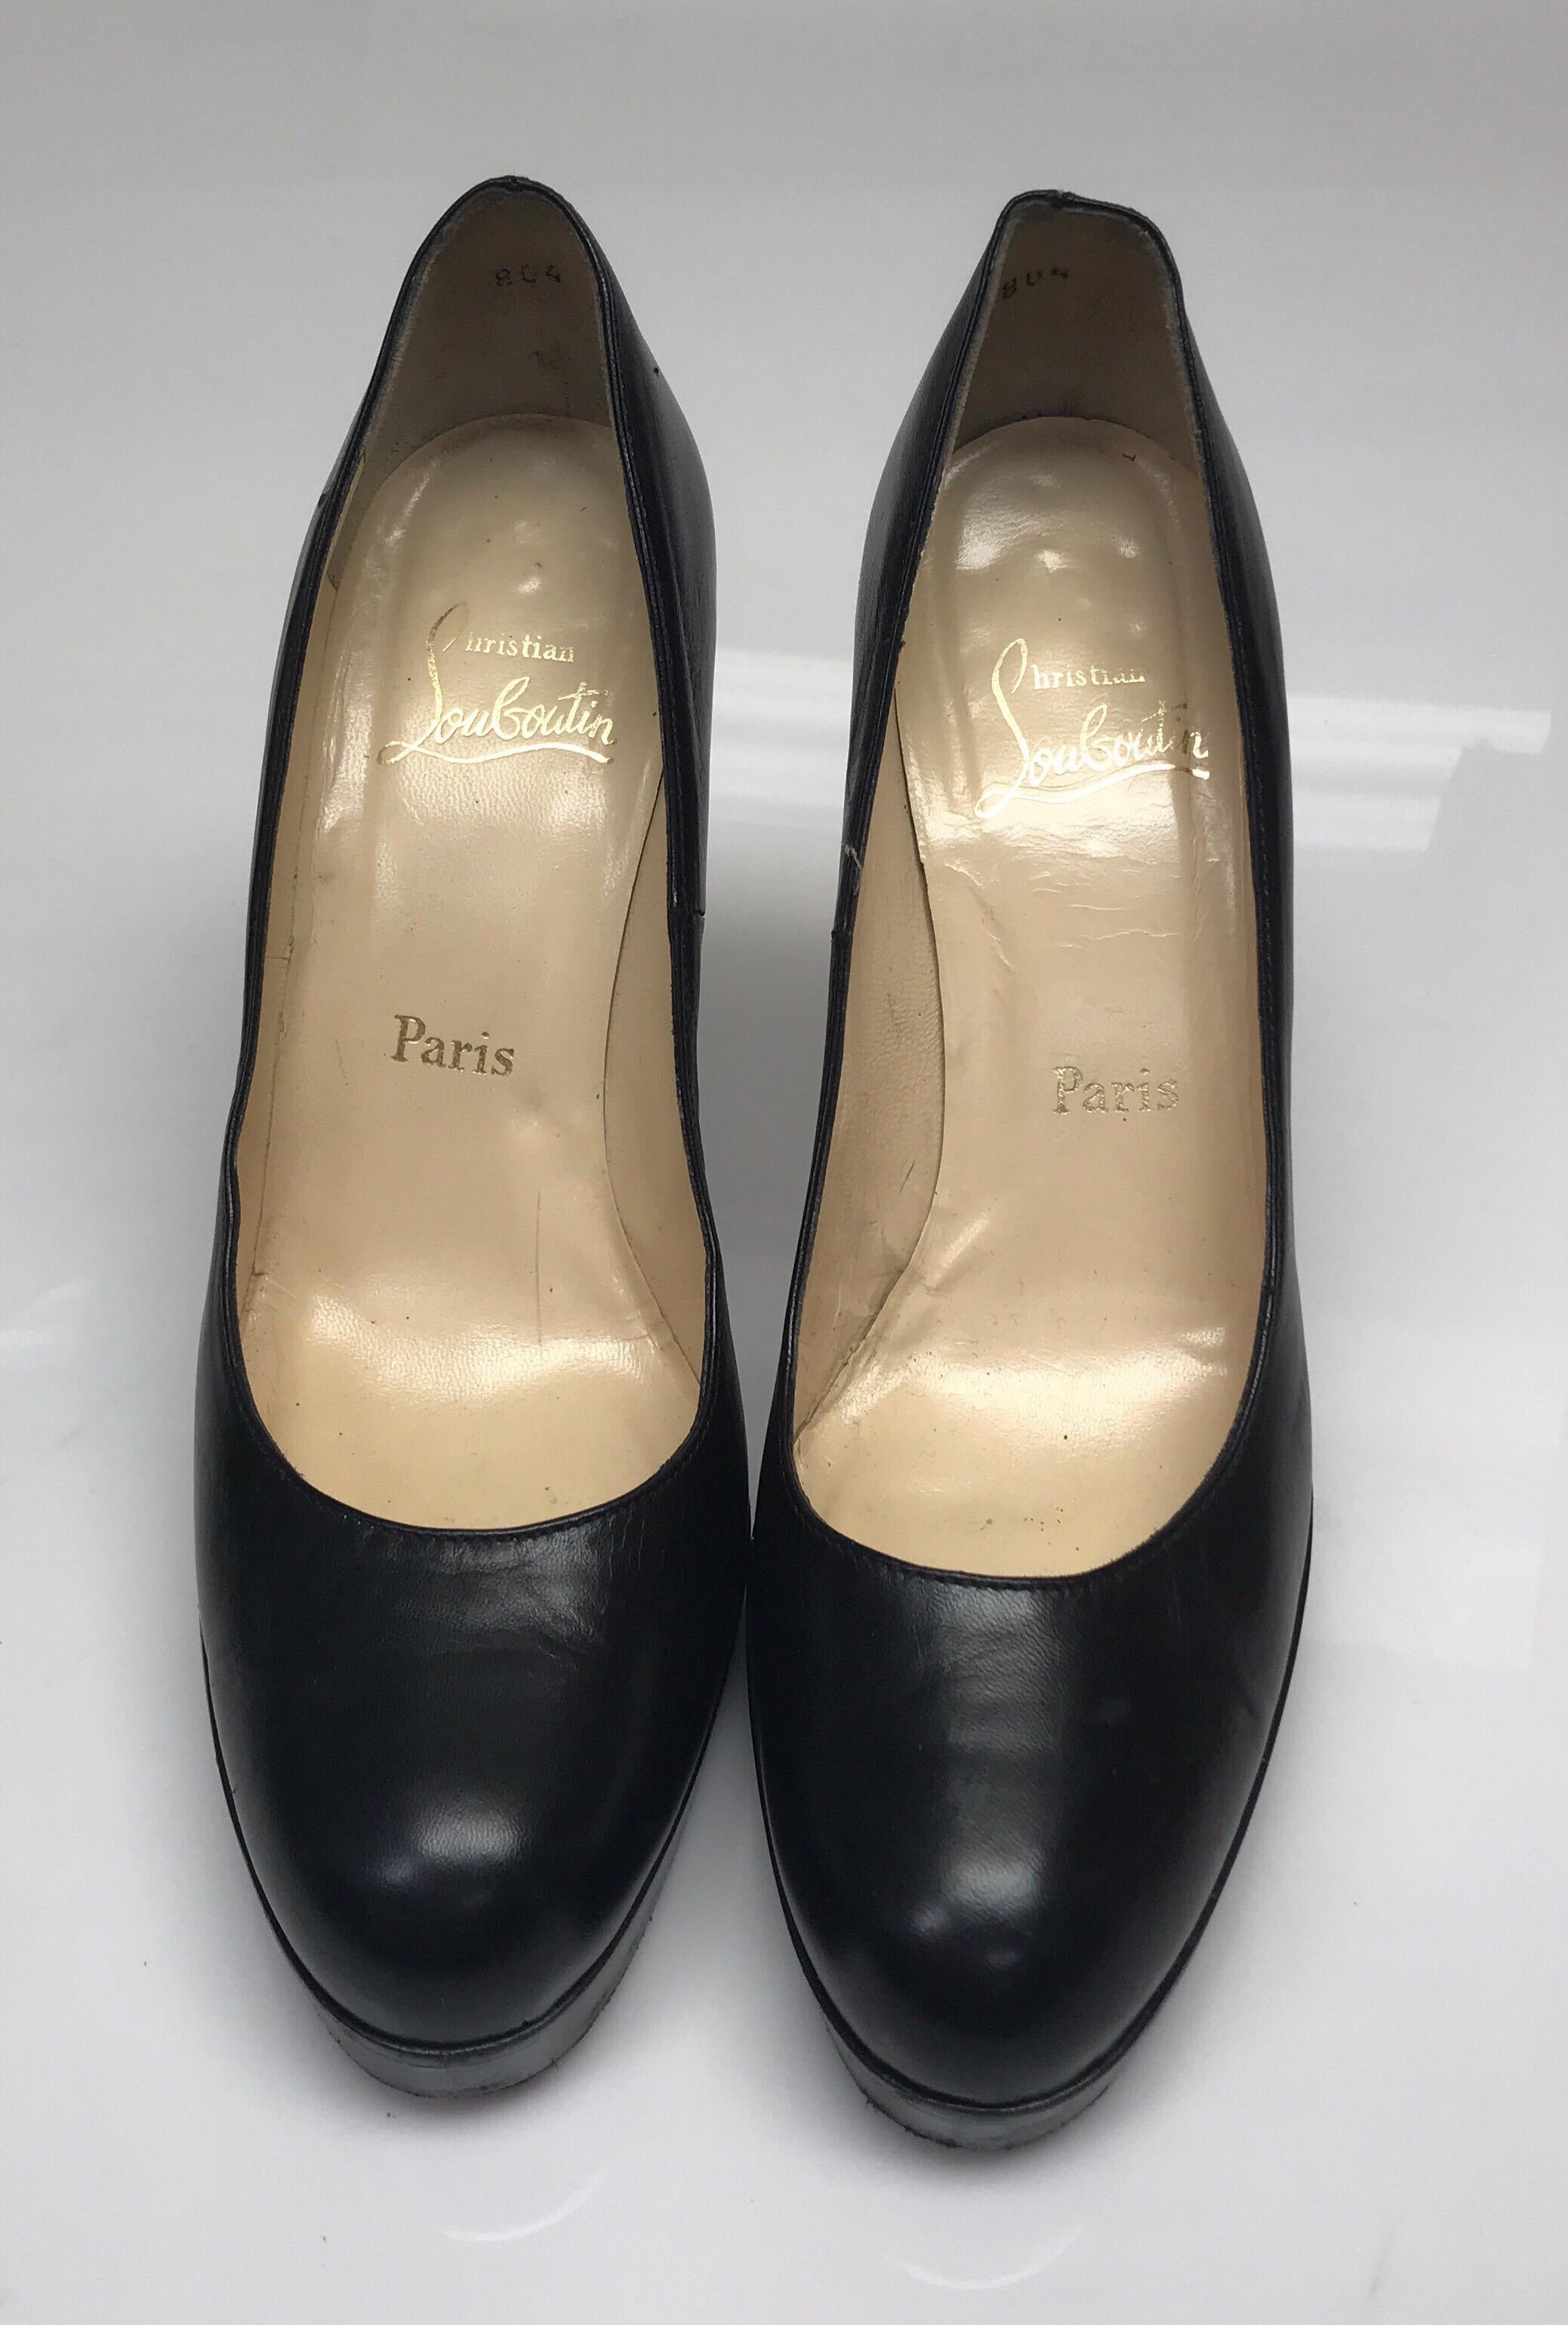 Christian Louboutin Black Leather High Heel-39. These Christian Louboutin pumps are in great condition. There is barely any sign of use, with exception to a few very minor scratches to the leather that are not noticeable. The bottoms of the heels